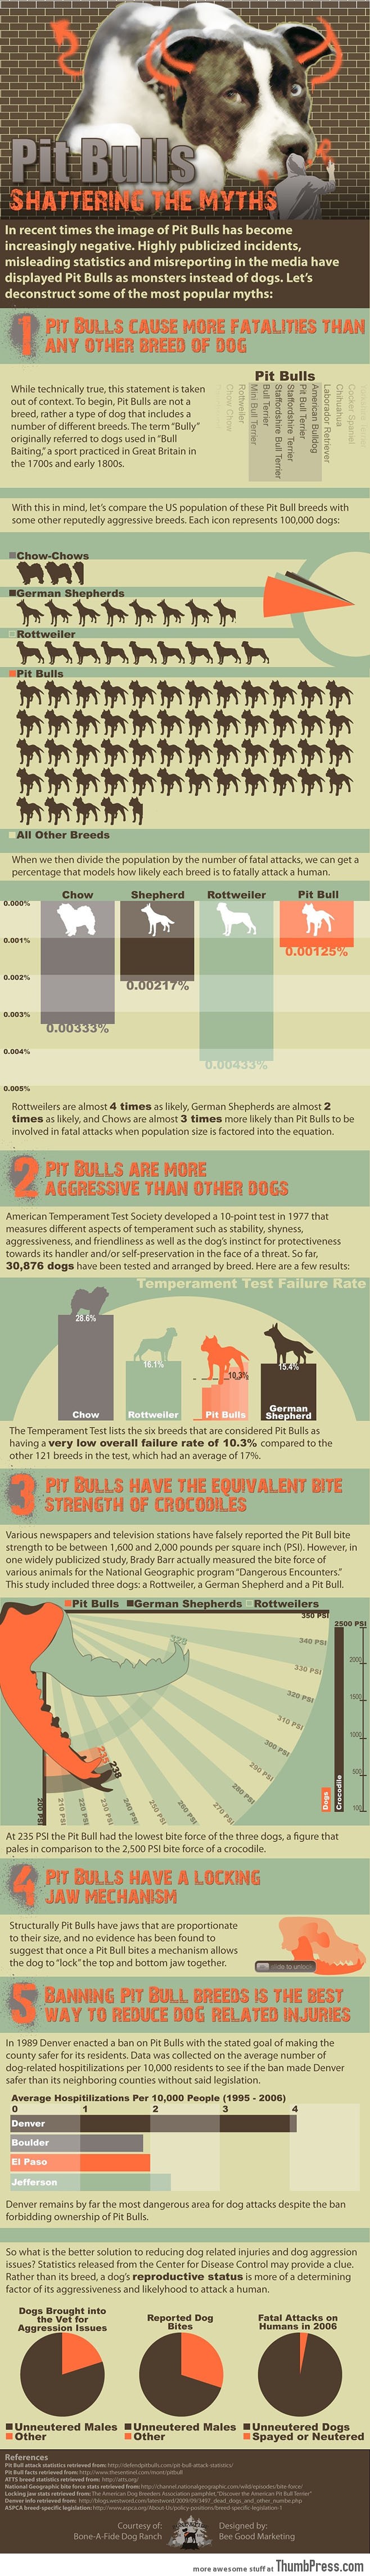 COMMON MYTHS ABOUT THE PIT BULL.